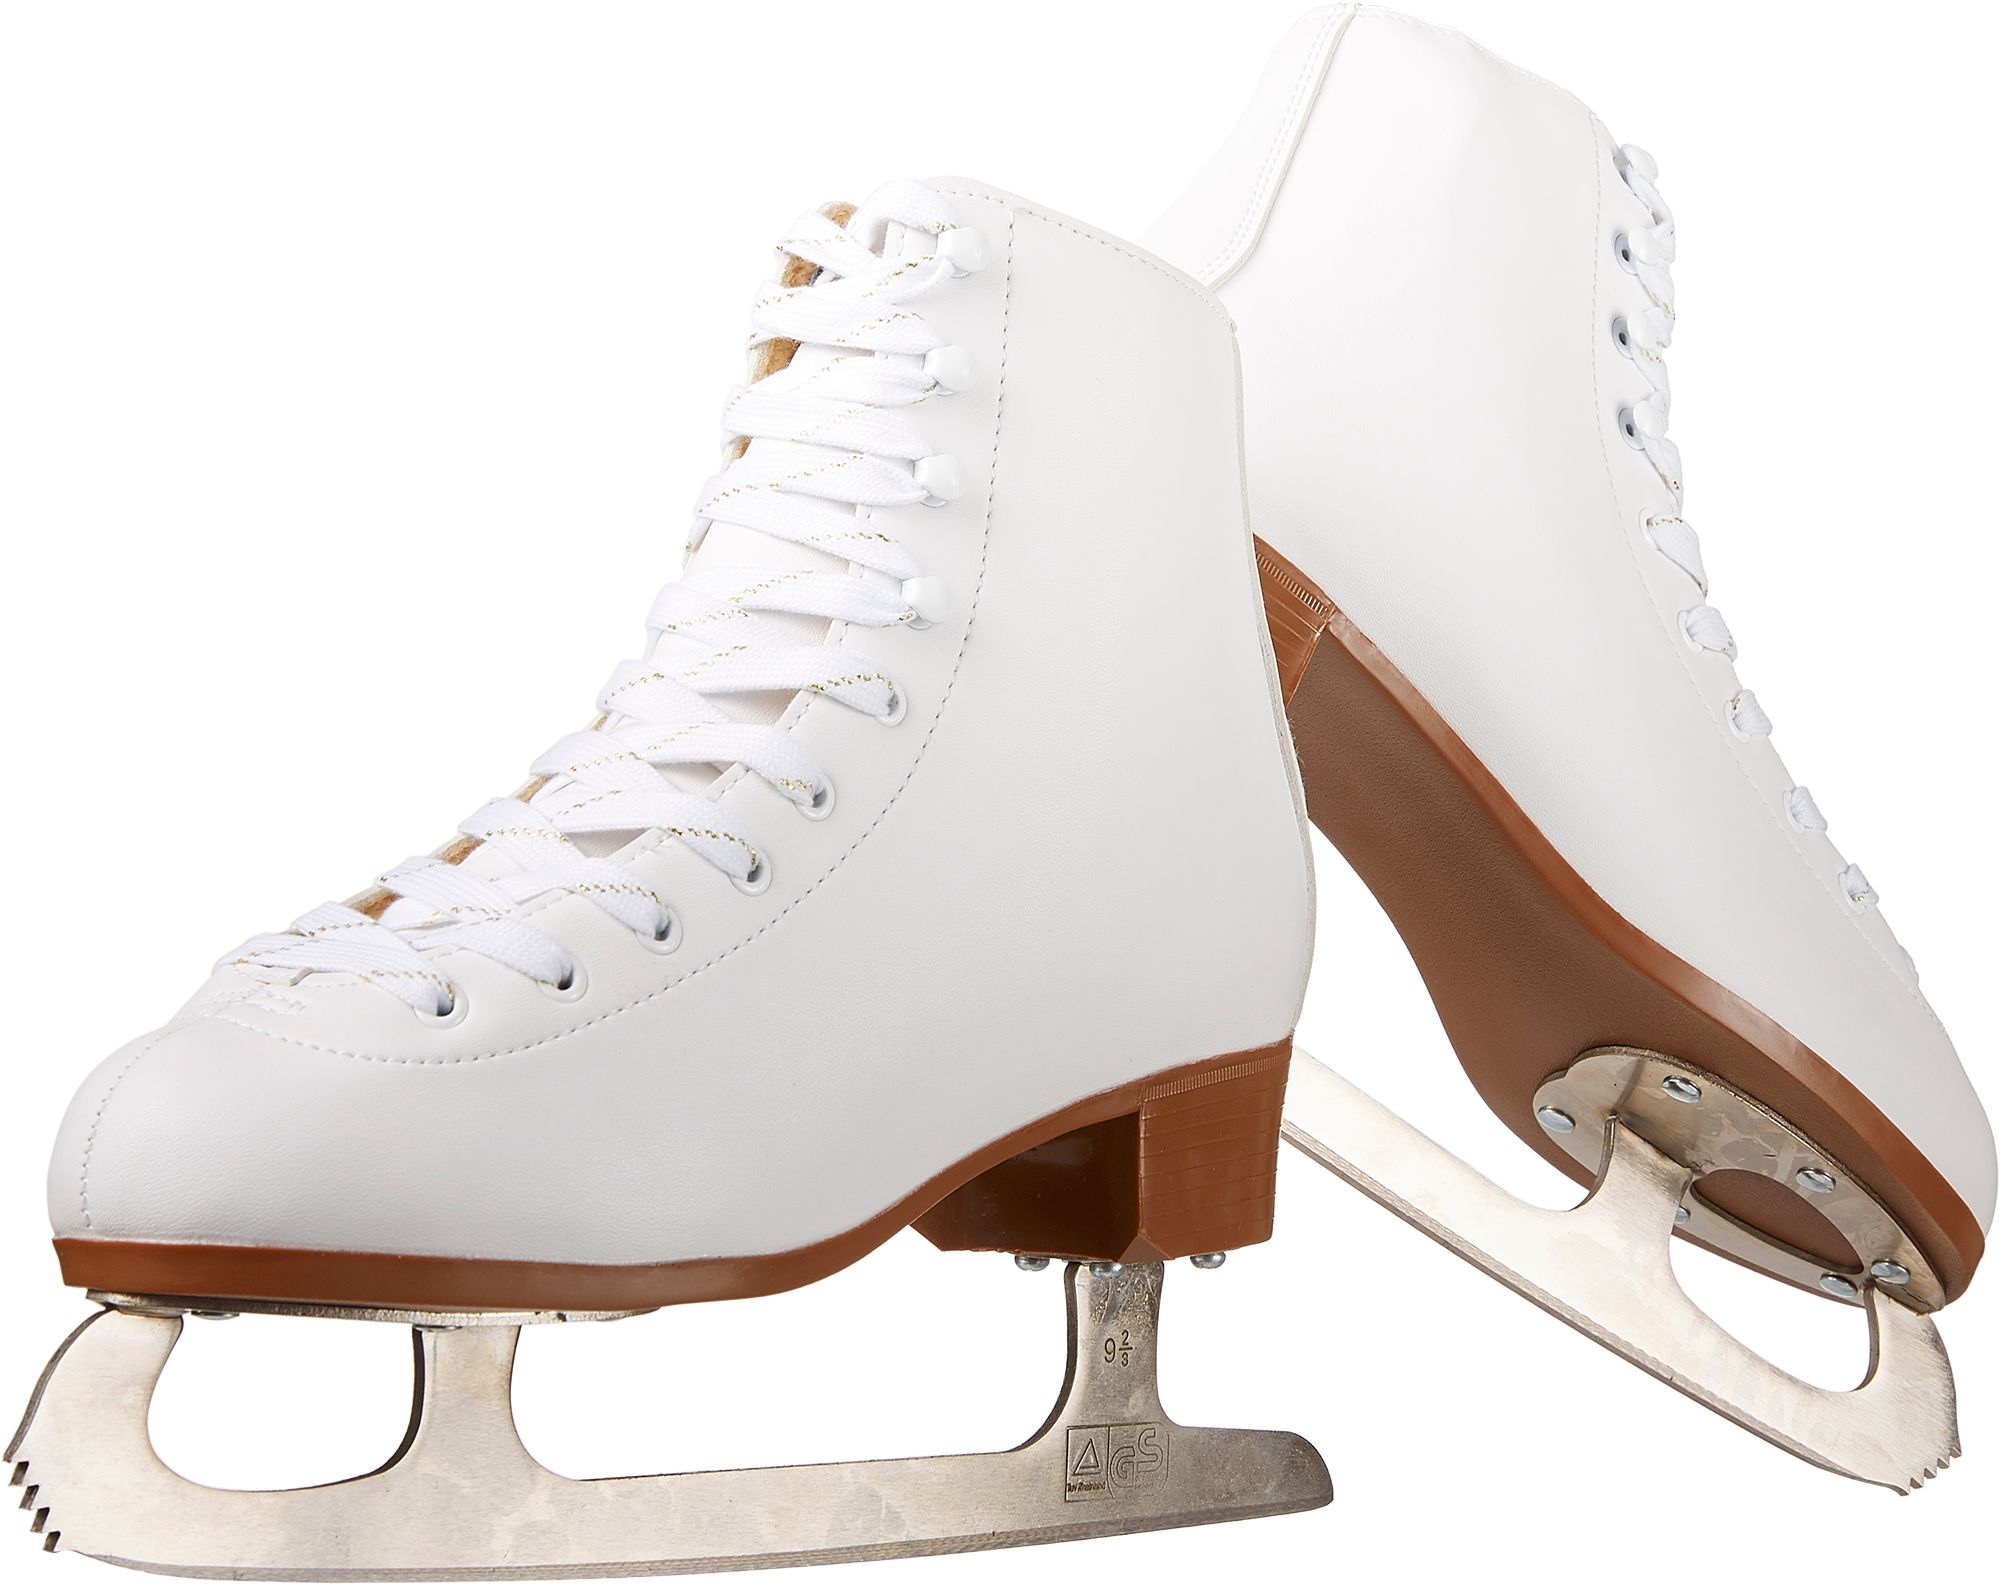 ice skates sold in stores